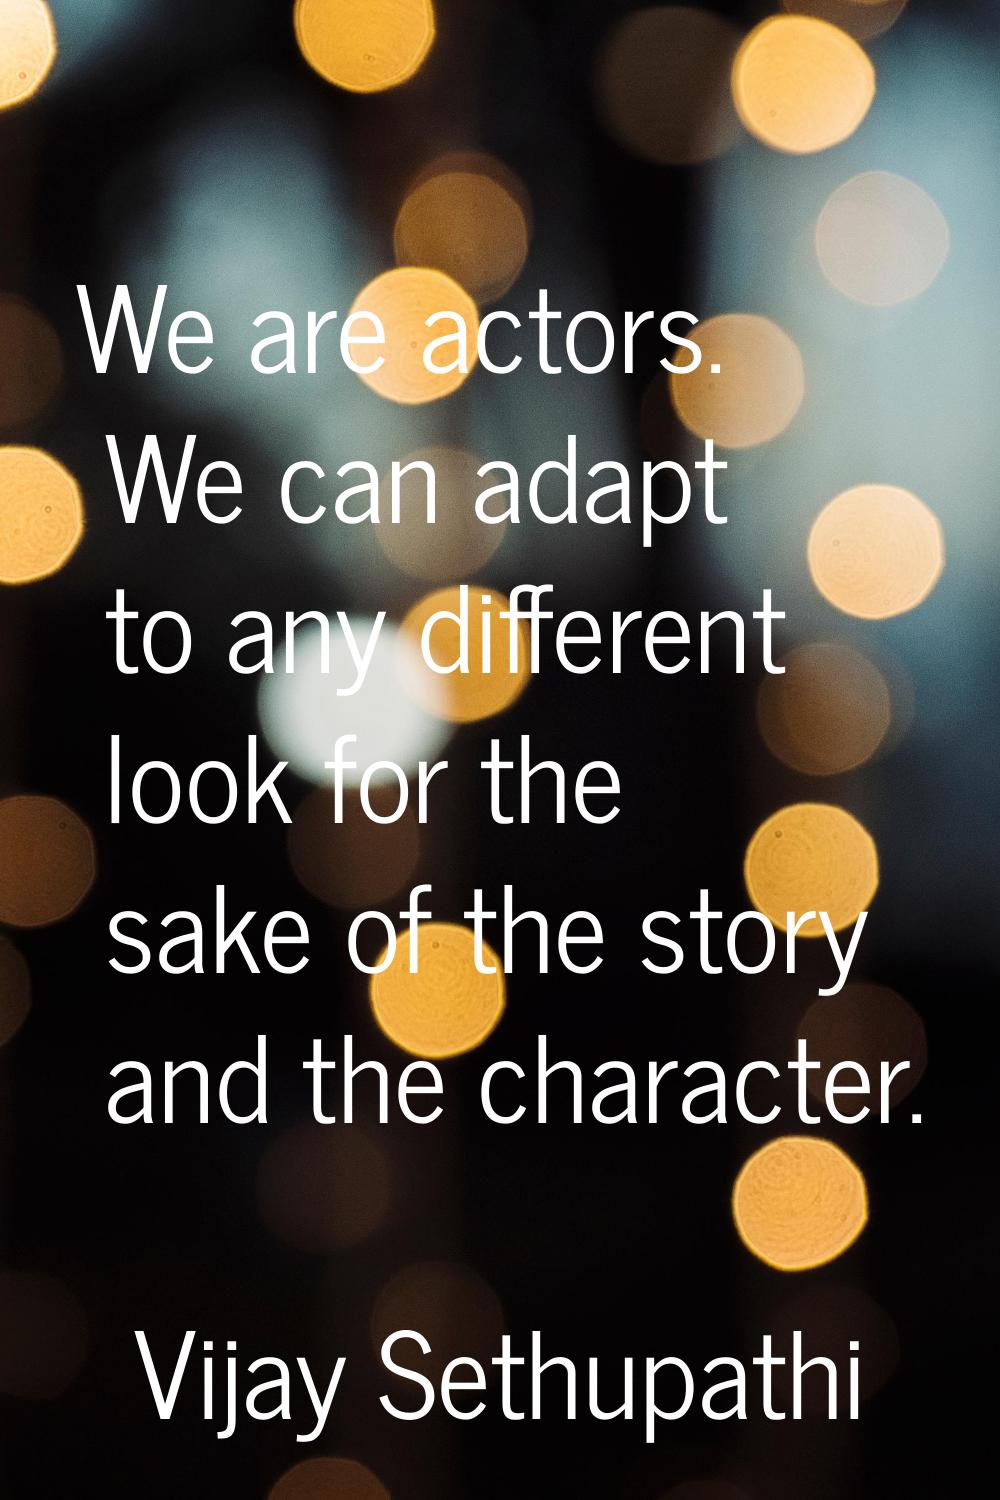 We are actors. We can adapt to any different look for the sake of the story and the character.